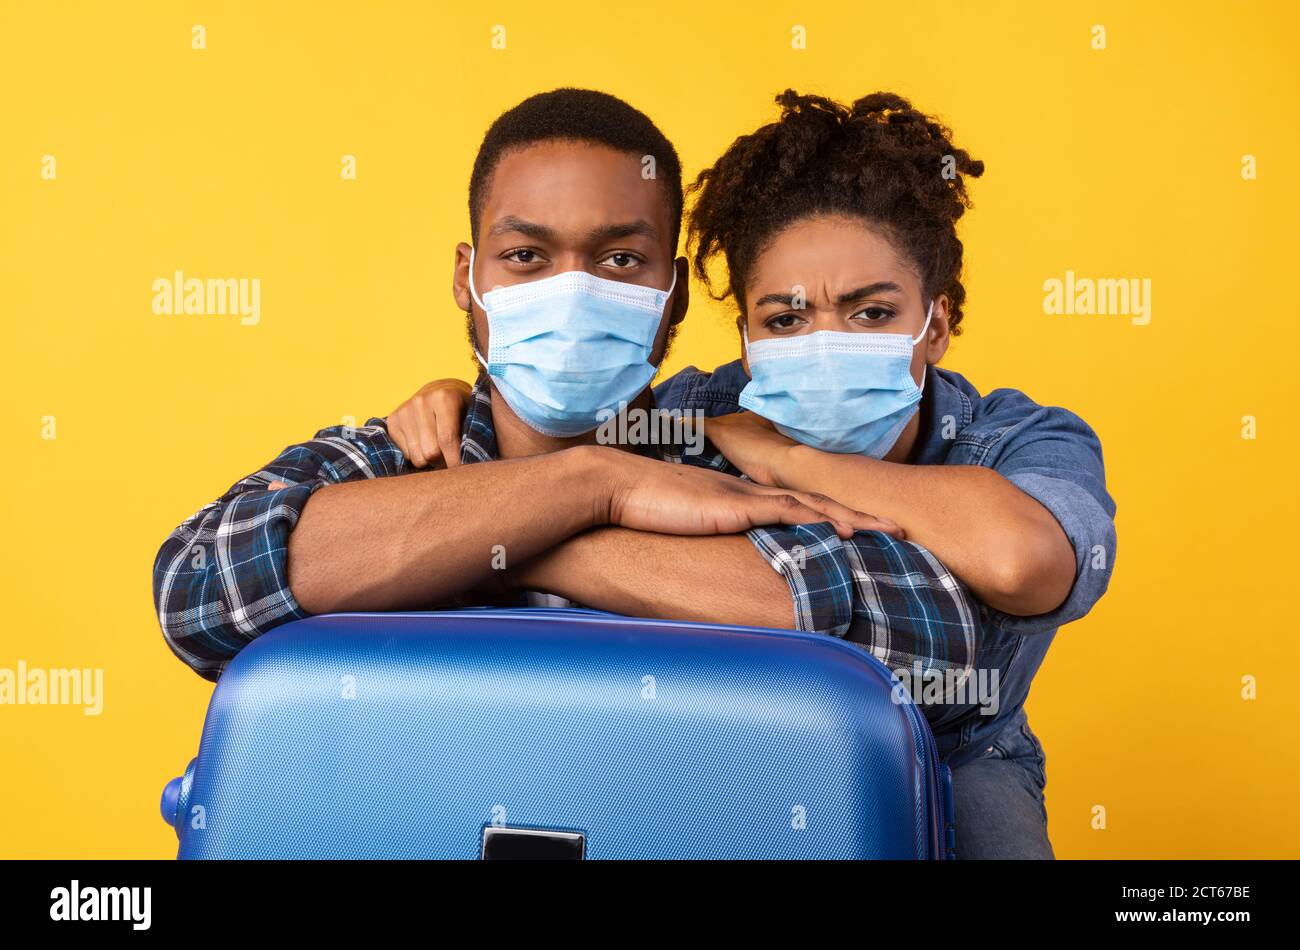 Black Travelers Couple Wearing Masks Posing With Suitcase In Studio Stock Photo